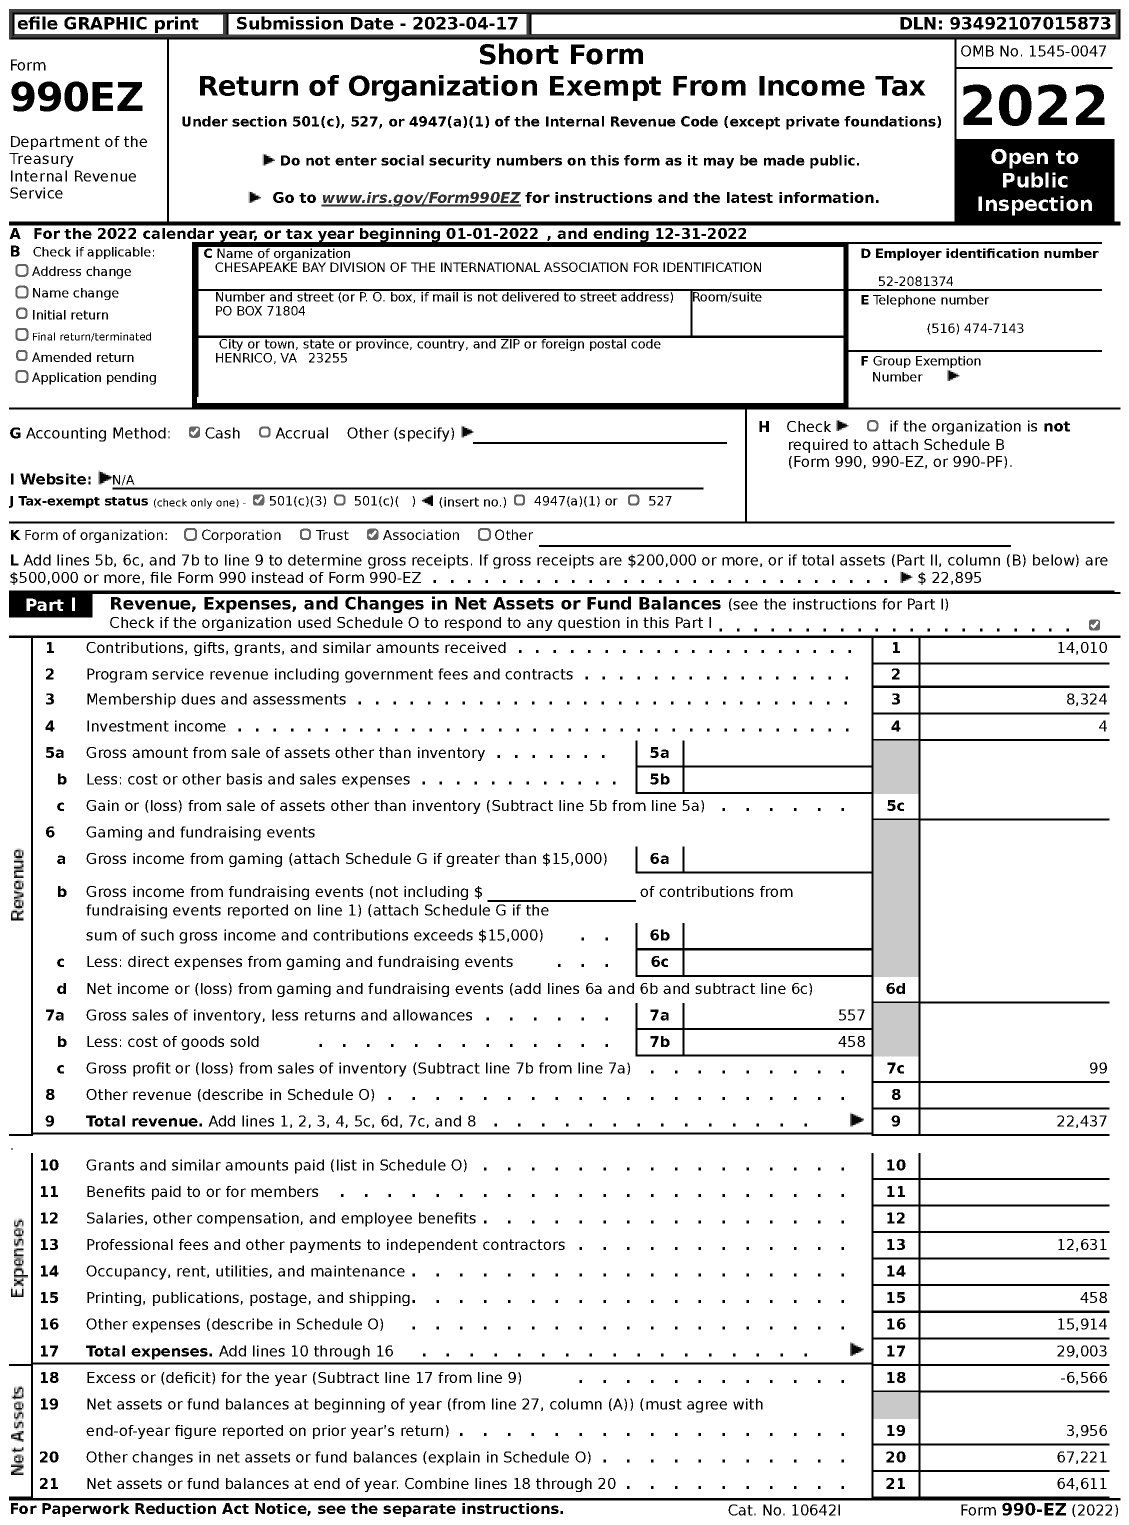 Image of first page of 2022 Form 990EZ for Chesapeake Bay Division of the International Association for Identification